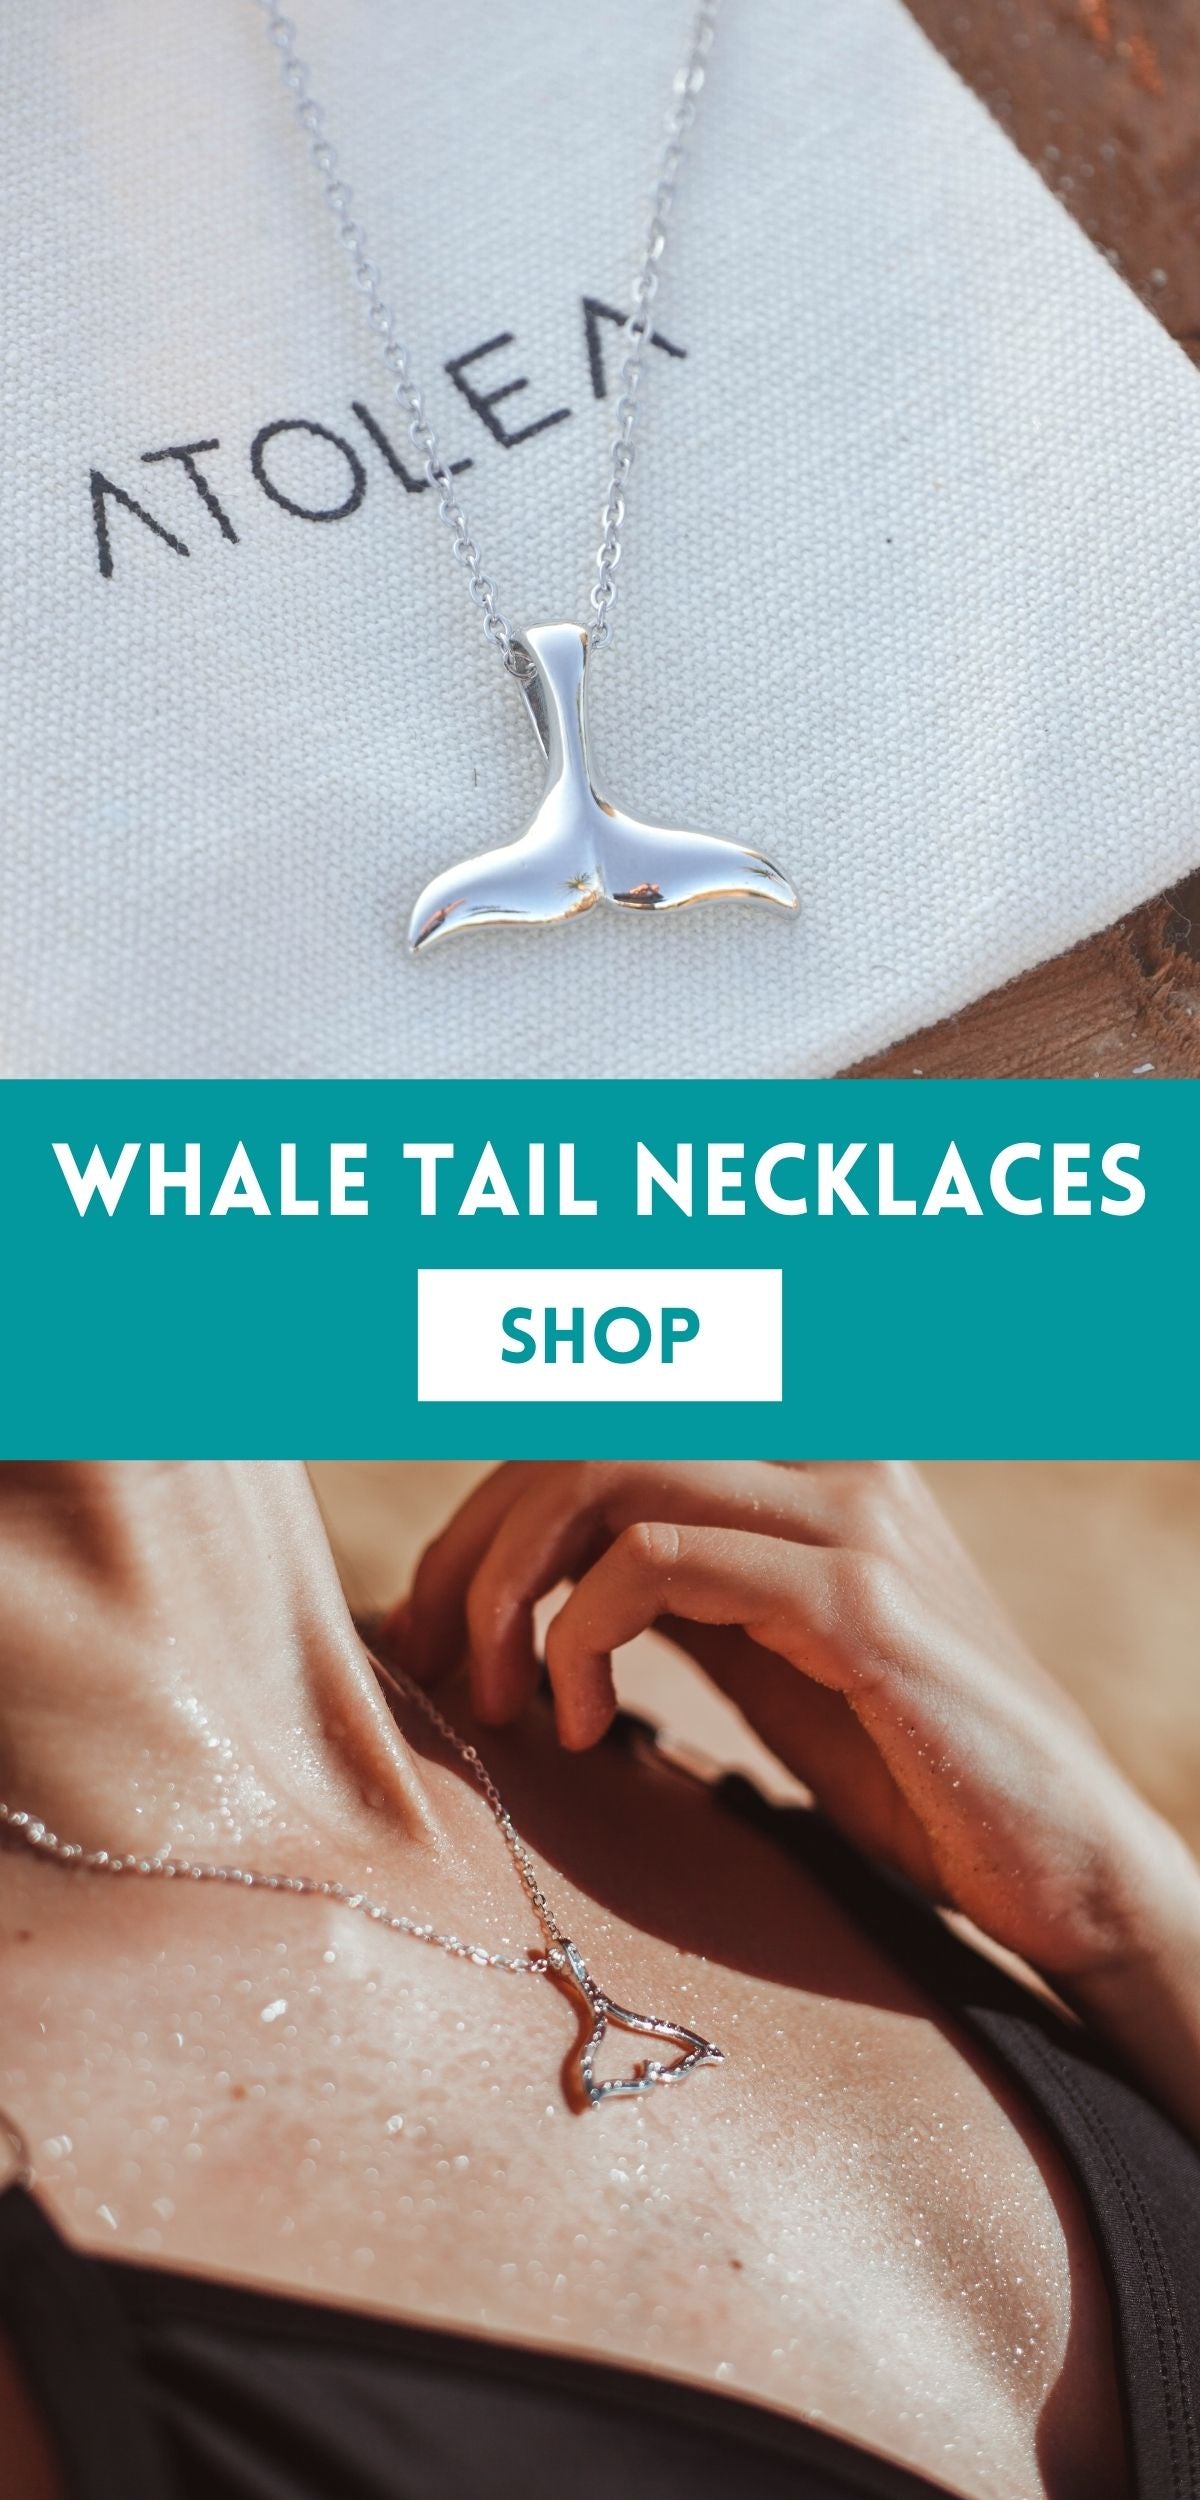 Whale tail necklaces meaning